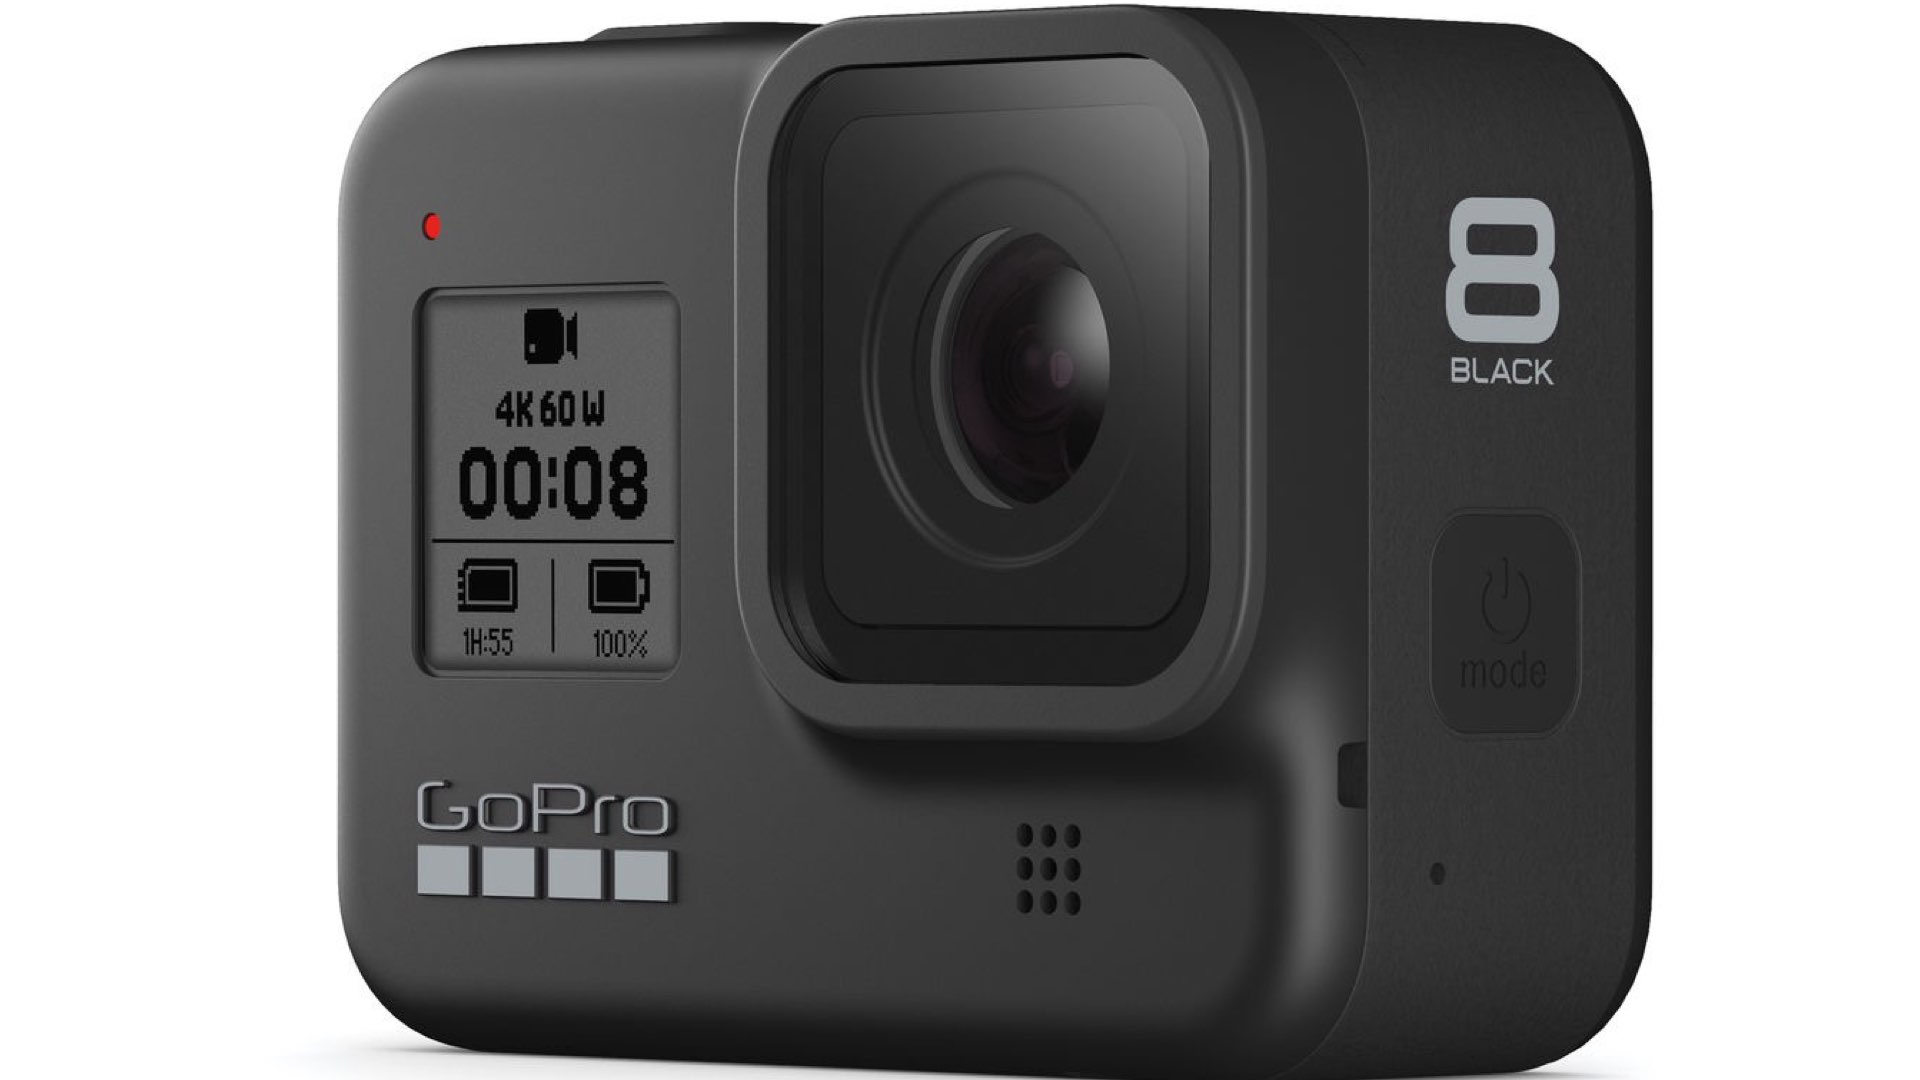 GoPro HERO8 Black Announced: There's Nothing New Under The Sun